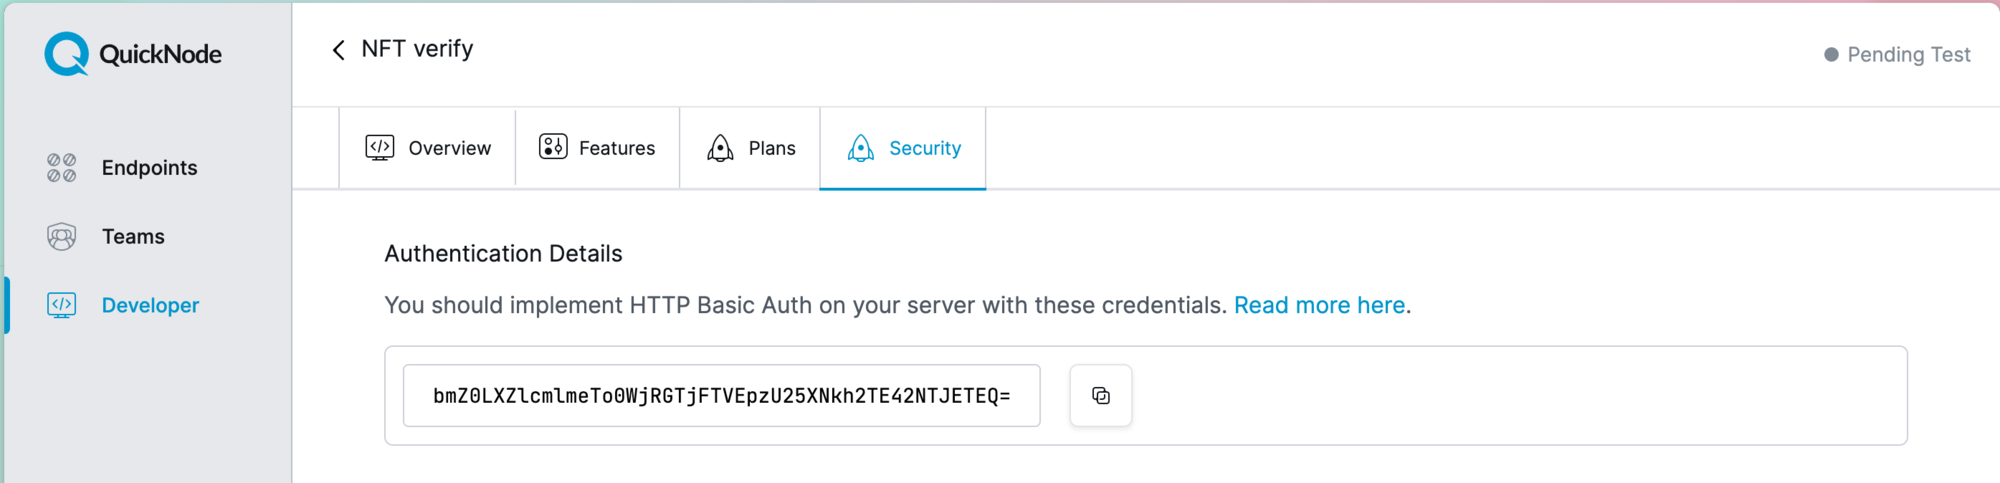 Add On Security Tab - Marketplace